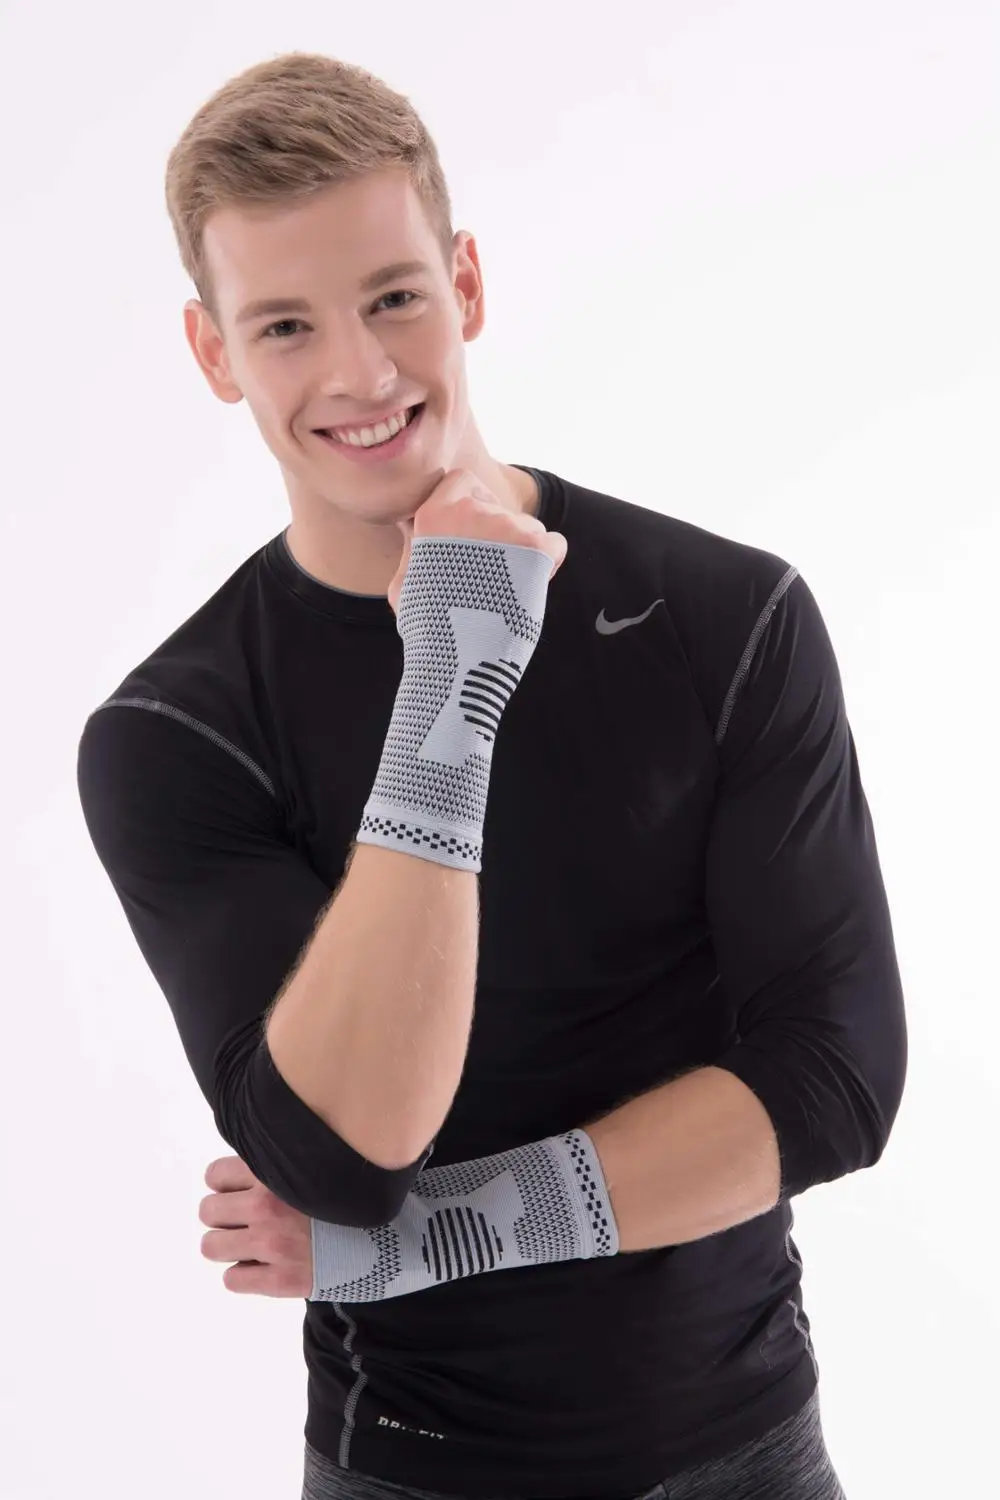 
Wrist Support Sleeve Compression Wrist Brace for Men and Women - Carpal Tunnel Tendonitis Arthritis Pain 